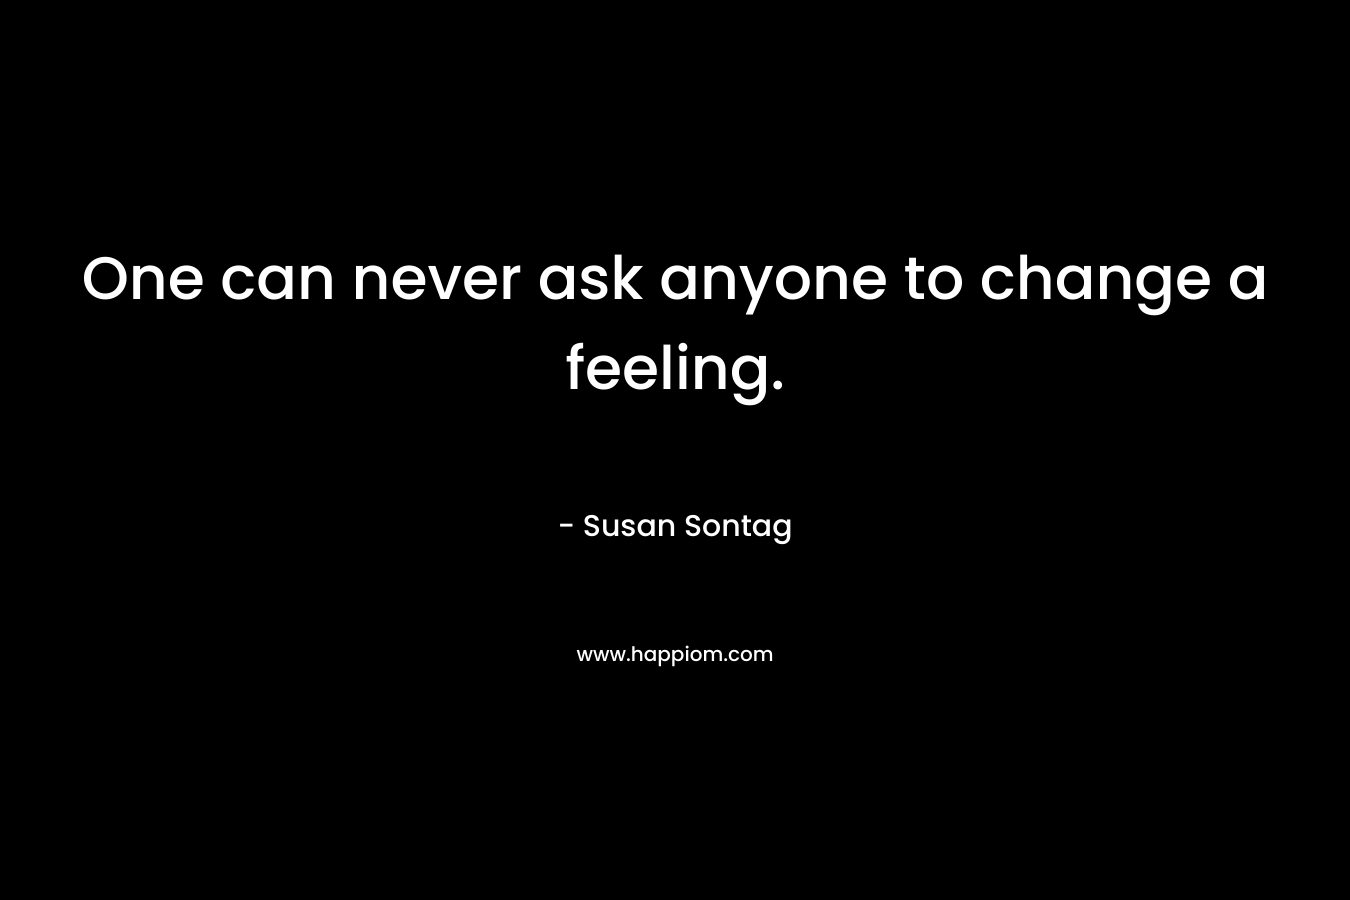 One can never ask anyone to change a feeling. – Susan Sontag